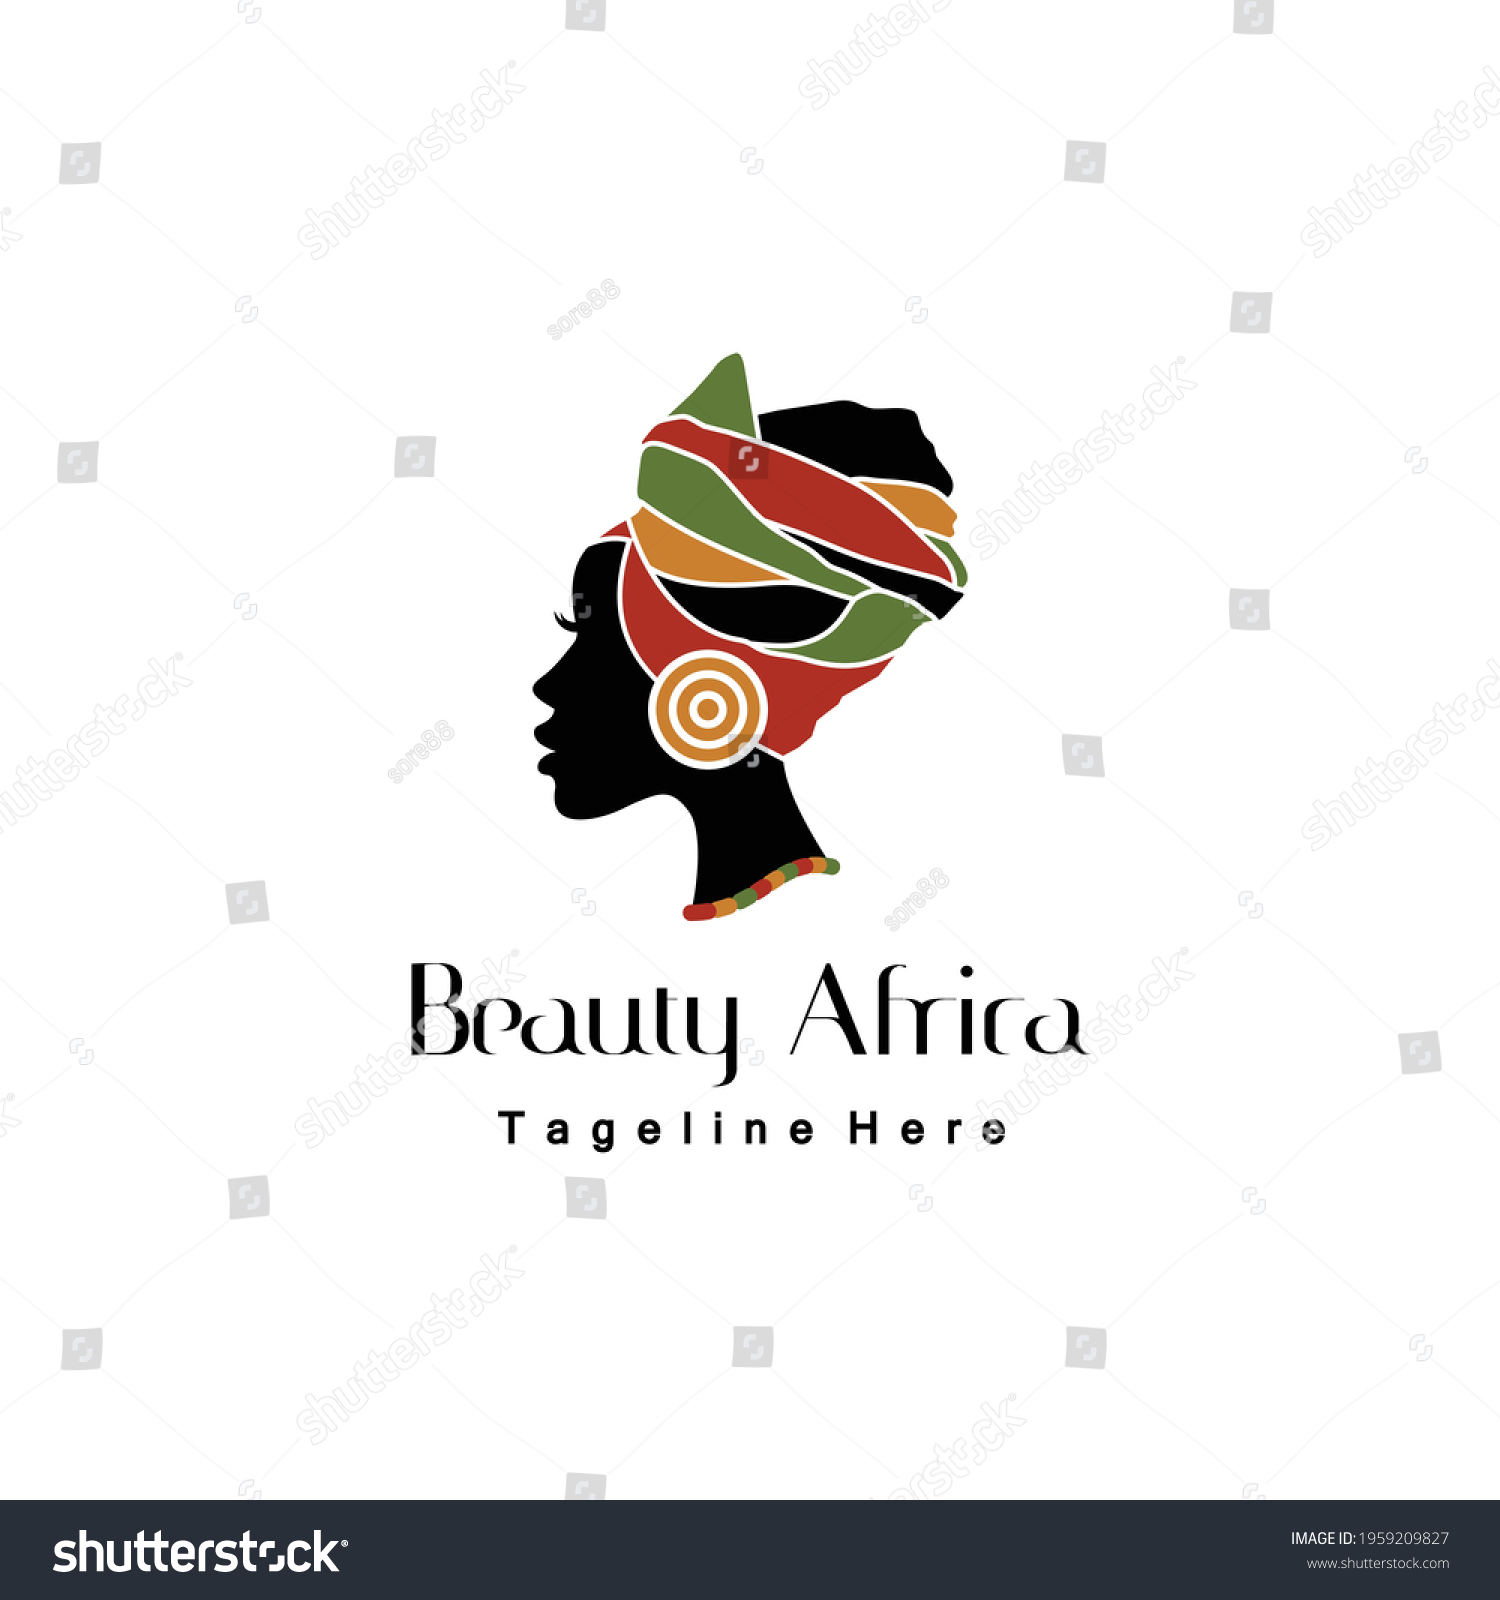 6,856 Africa fashion logo Images, Stock Photos & Vectors | Shutterstock